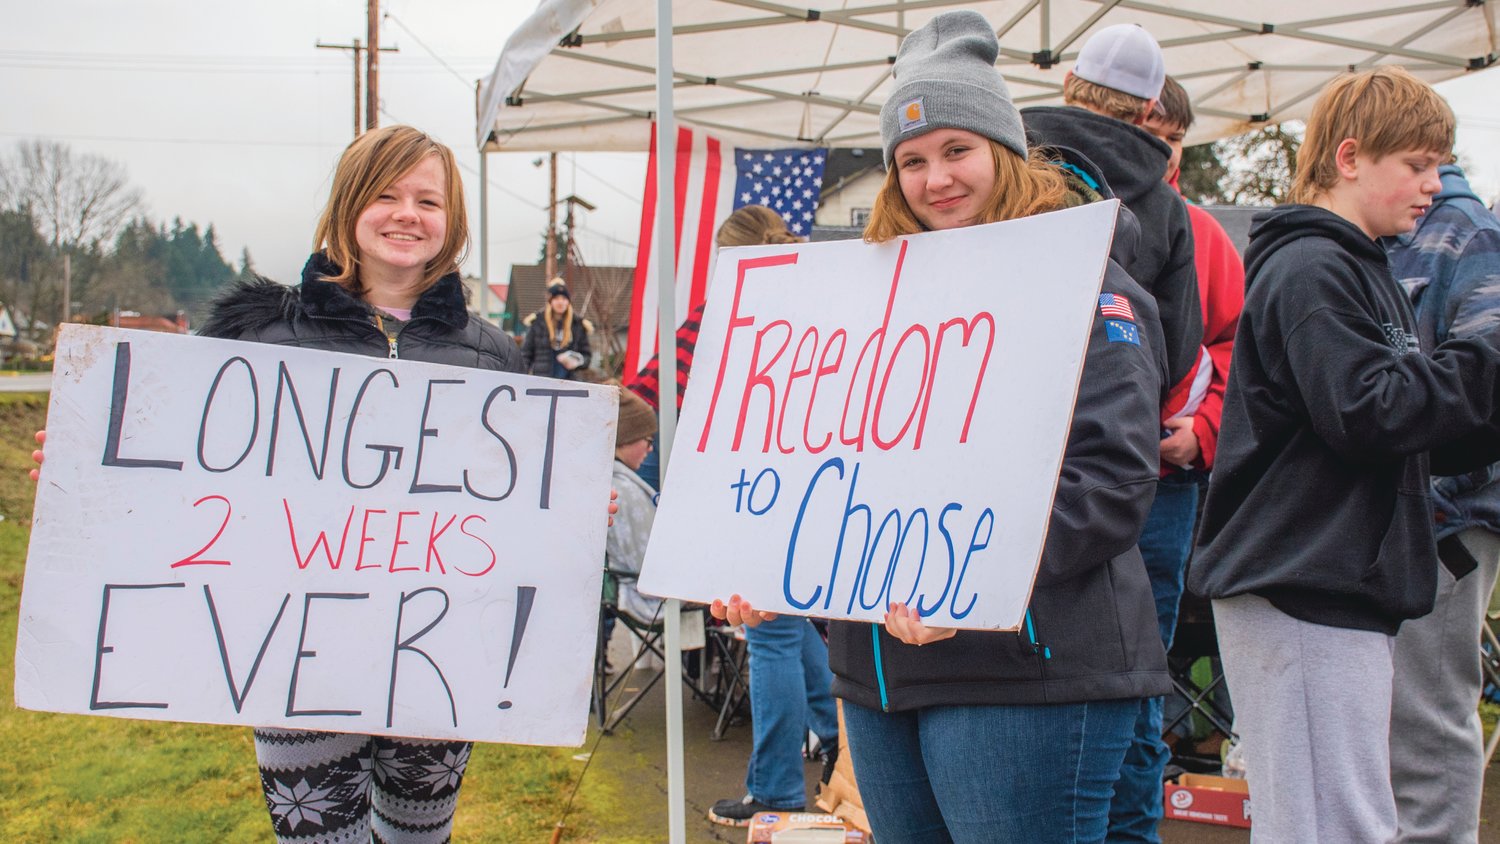 Randi Belanger, a 7th grader, and Kessa Smith, a sophomore, smile and hold signs during a demonstration outside the Pe Ell School District on Wednesday.